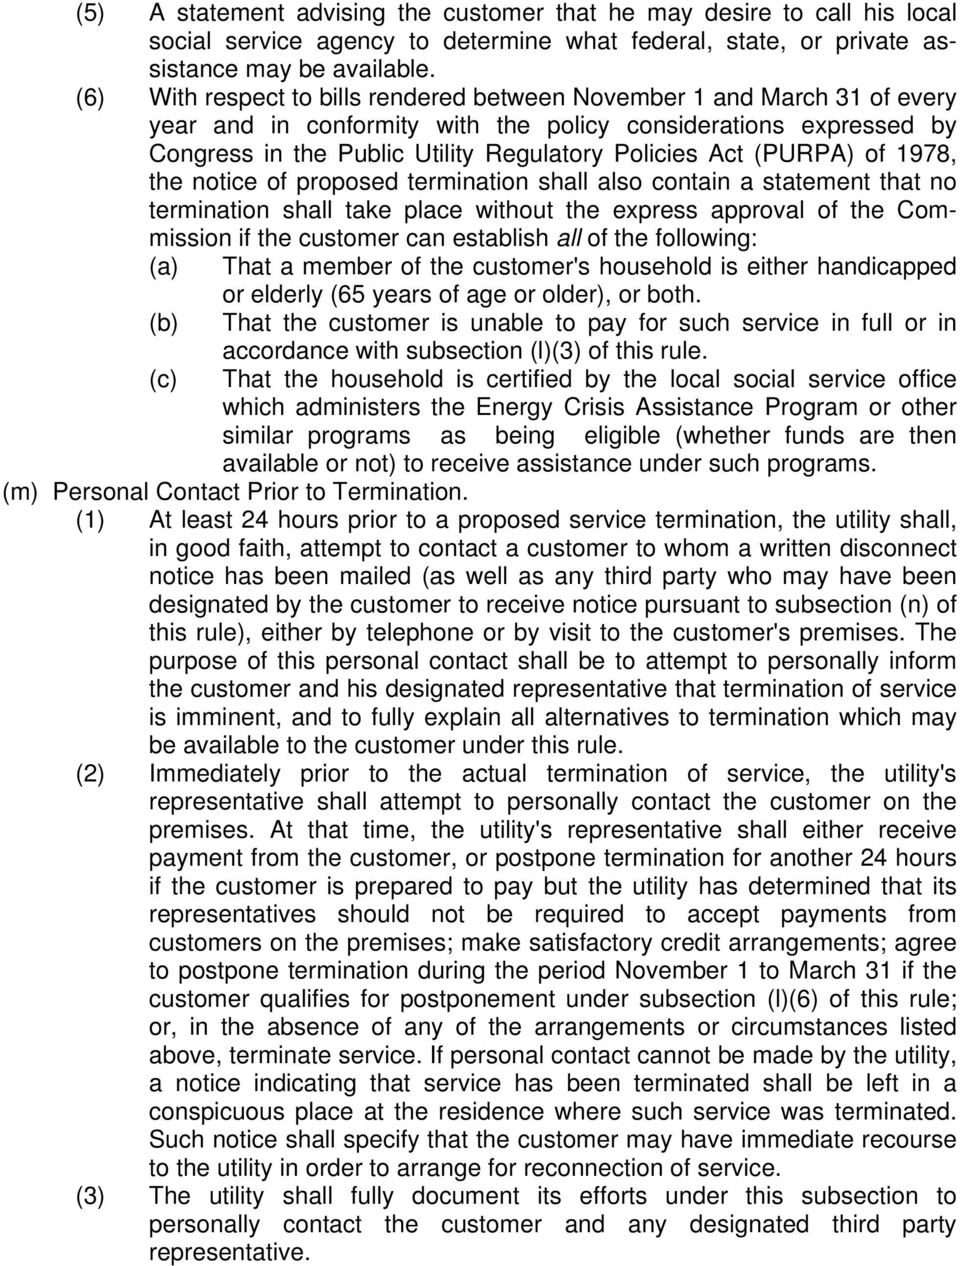 (PURPA) of 1978, the notice of proposed termination shall also contain a statement that no termination shall take place without the express approval of the Commission if the customer can establish